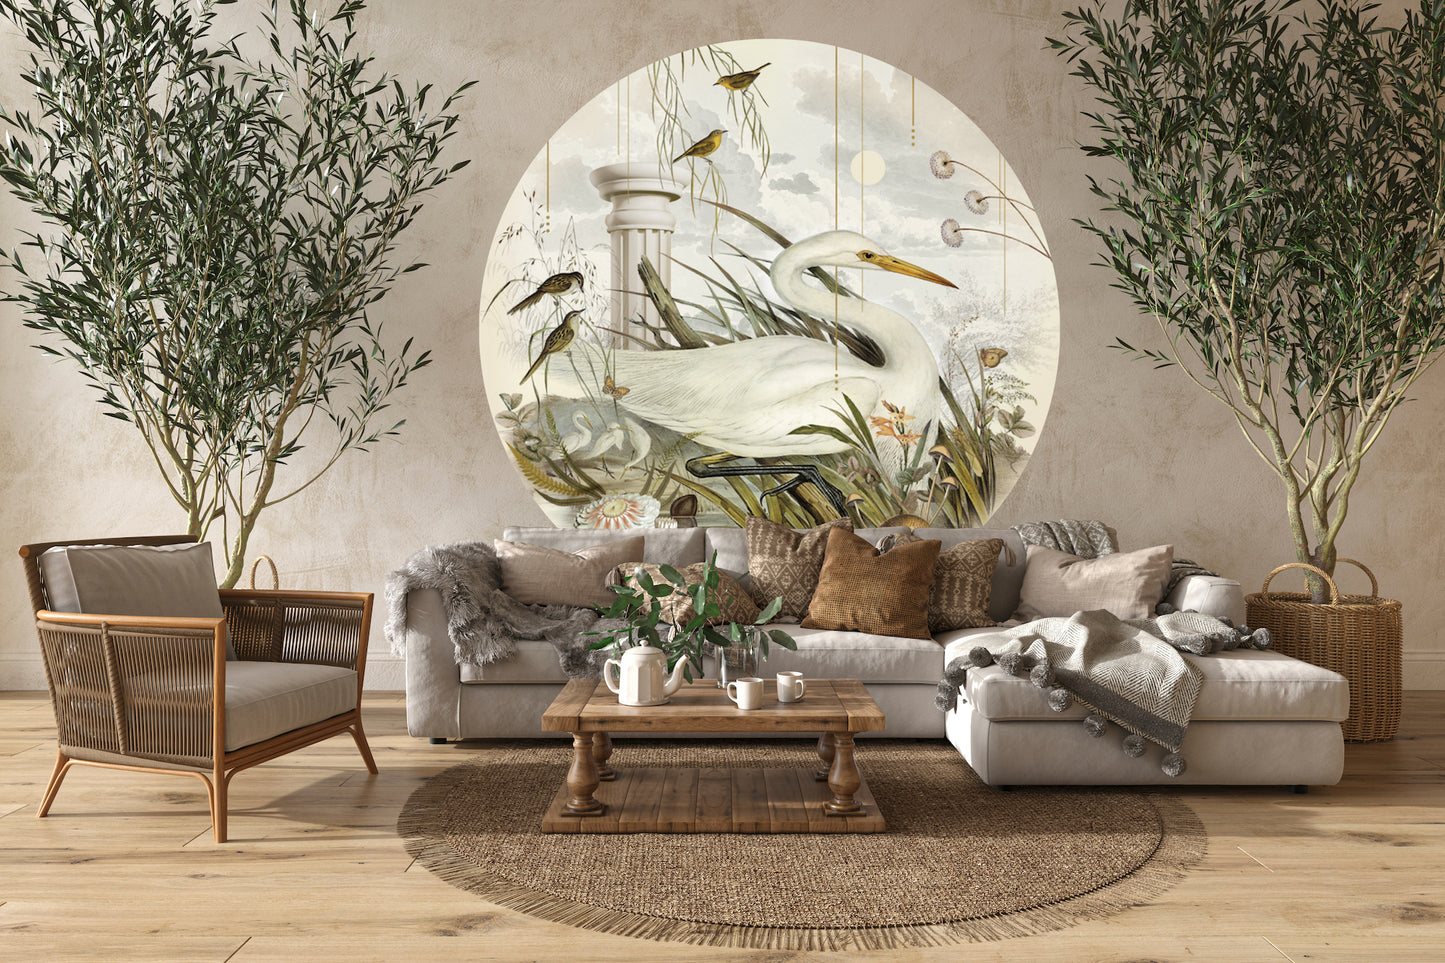 "Morning Bliss" Self-adhesive wallpaper, round vintage bird wall decal.